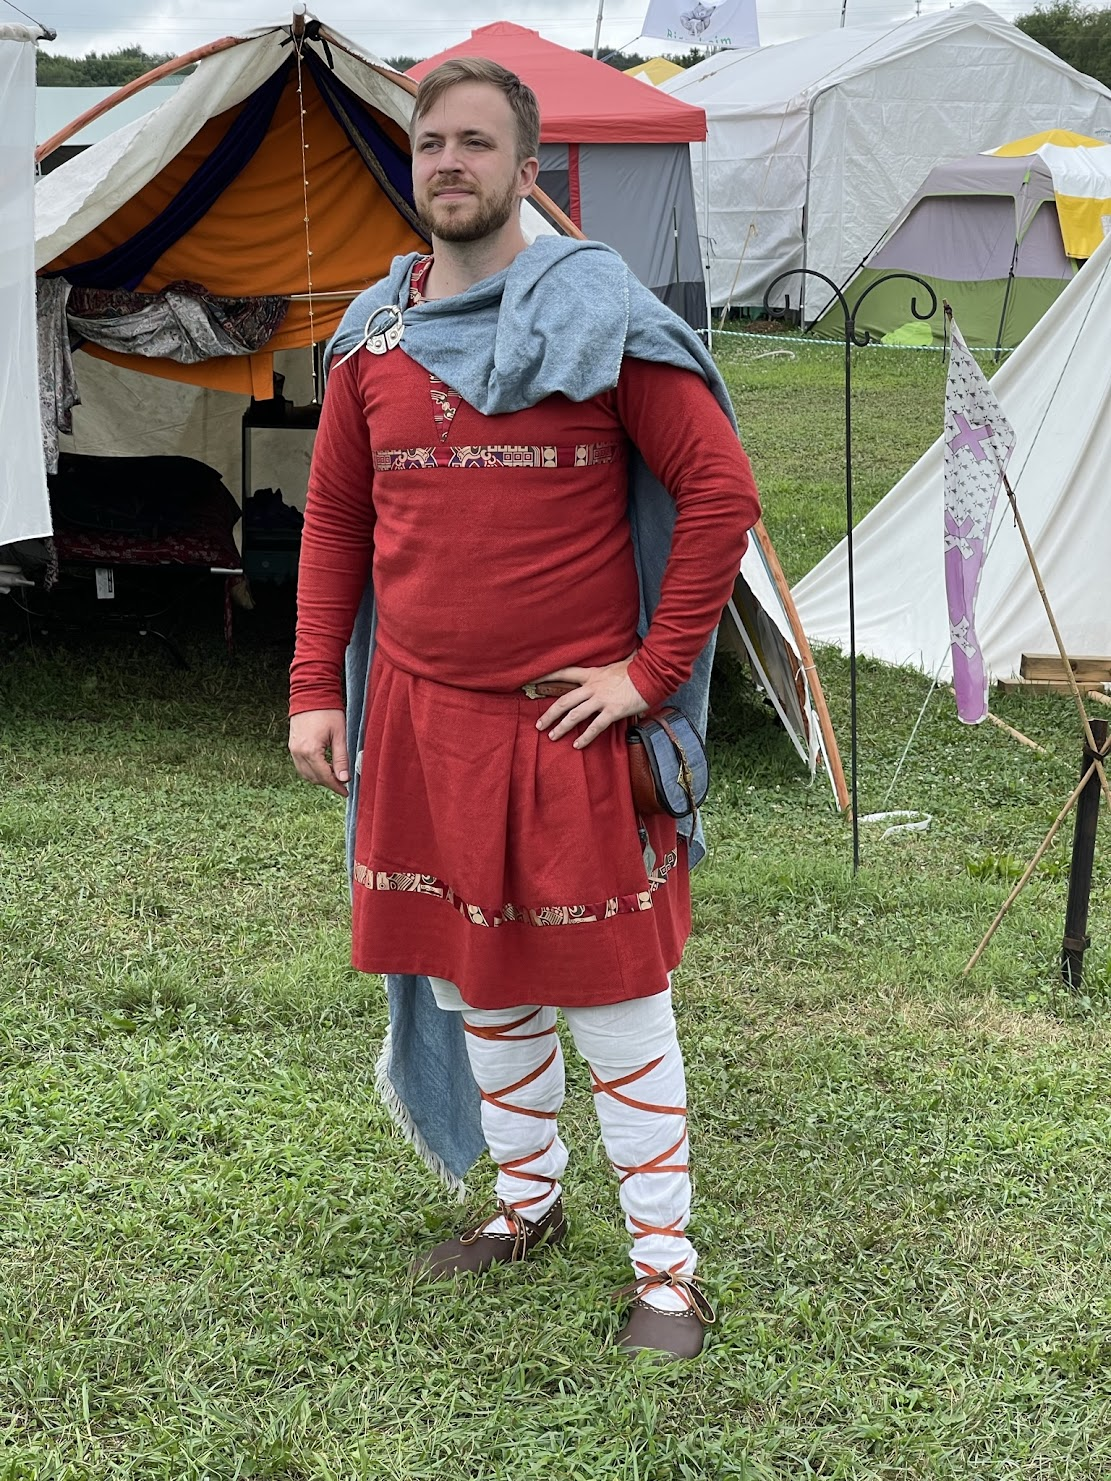 Alec standing in the outfit described in this post, with a bright red tunic with silk trimmings, a blue cloak, and white hose with red cross-garters